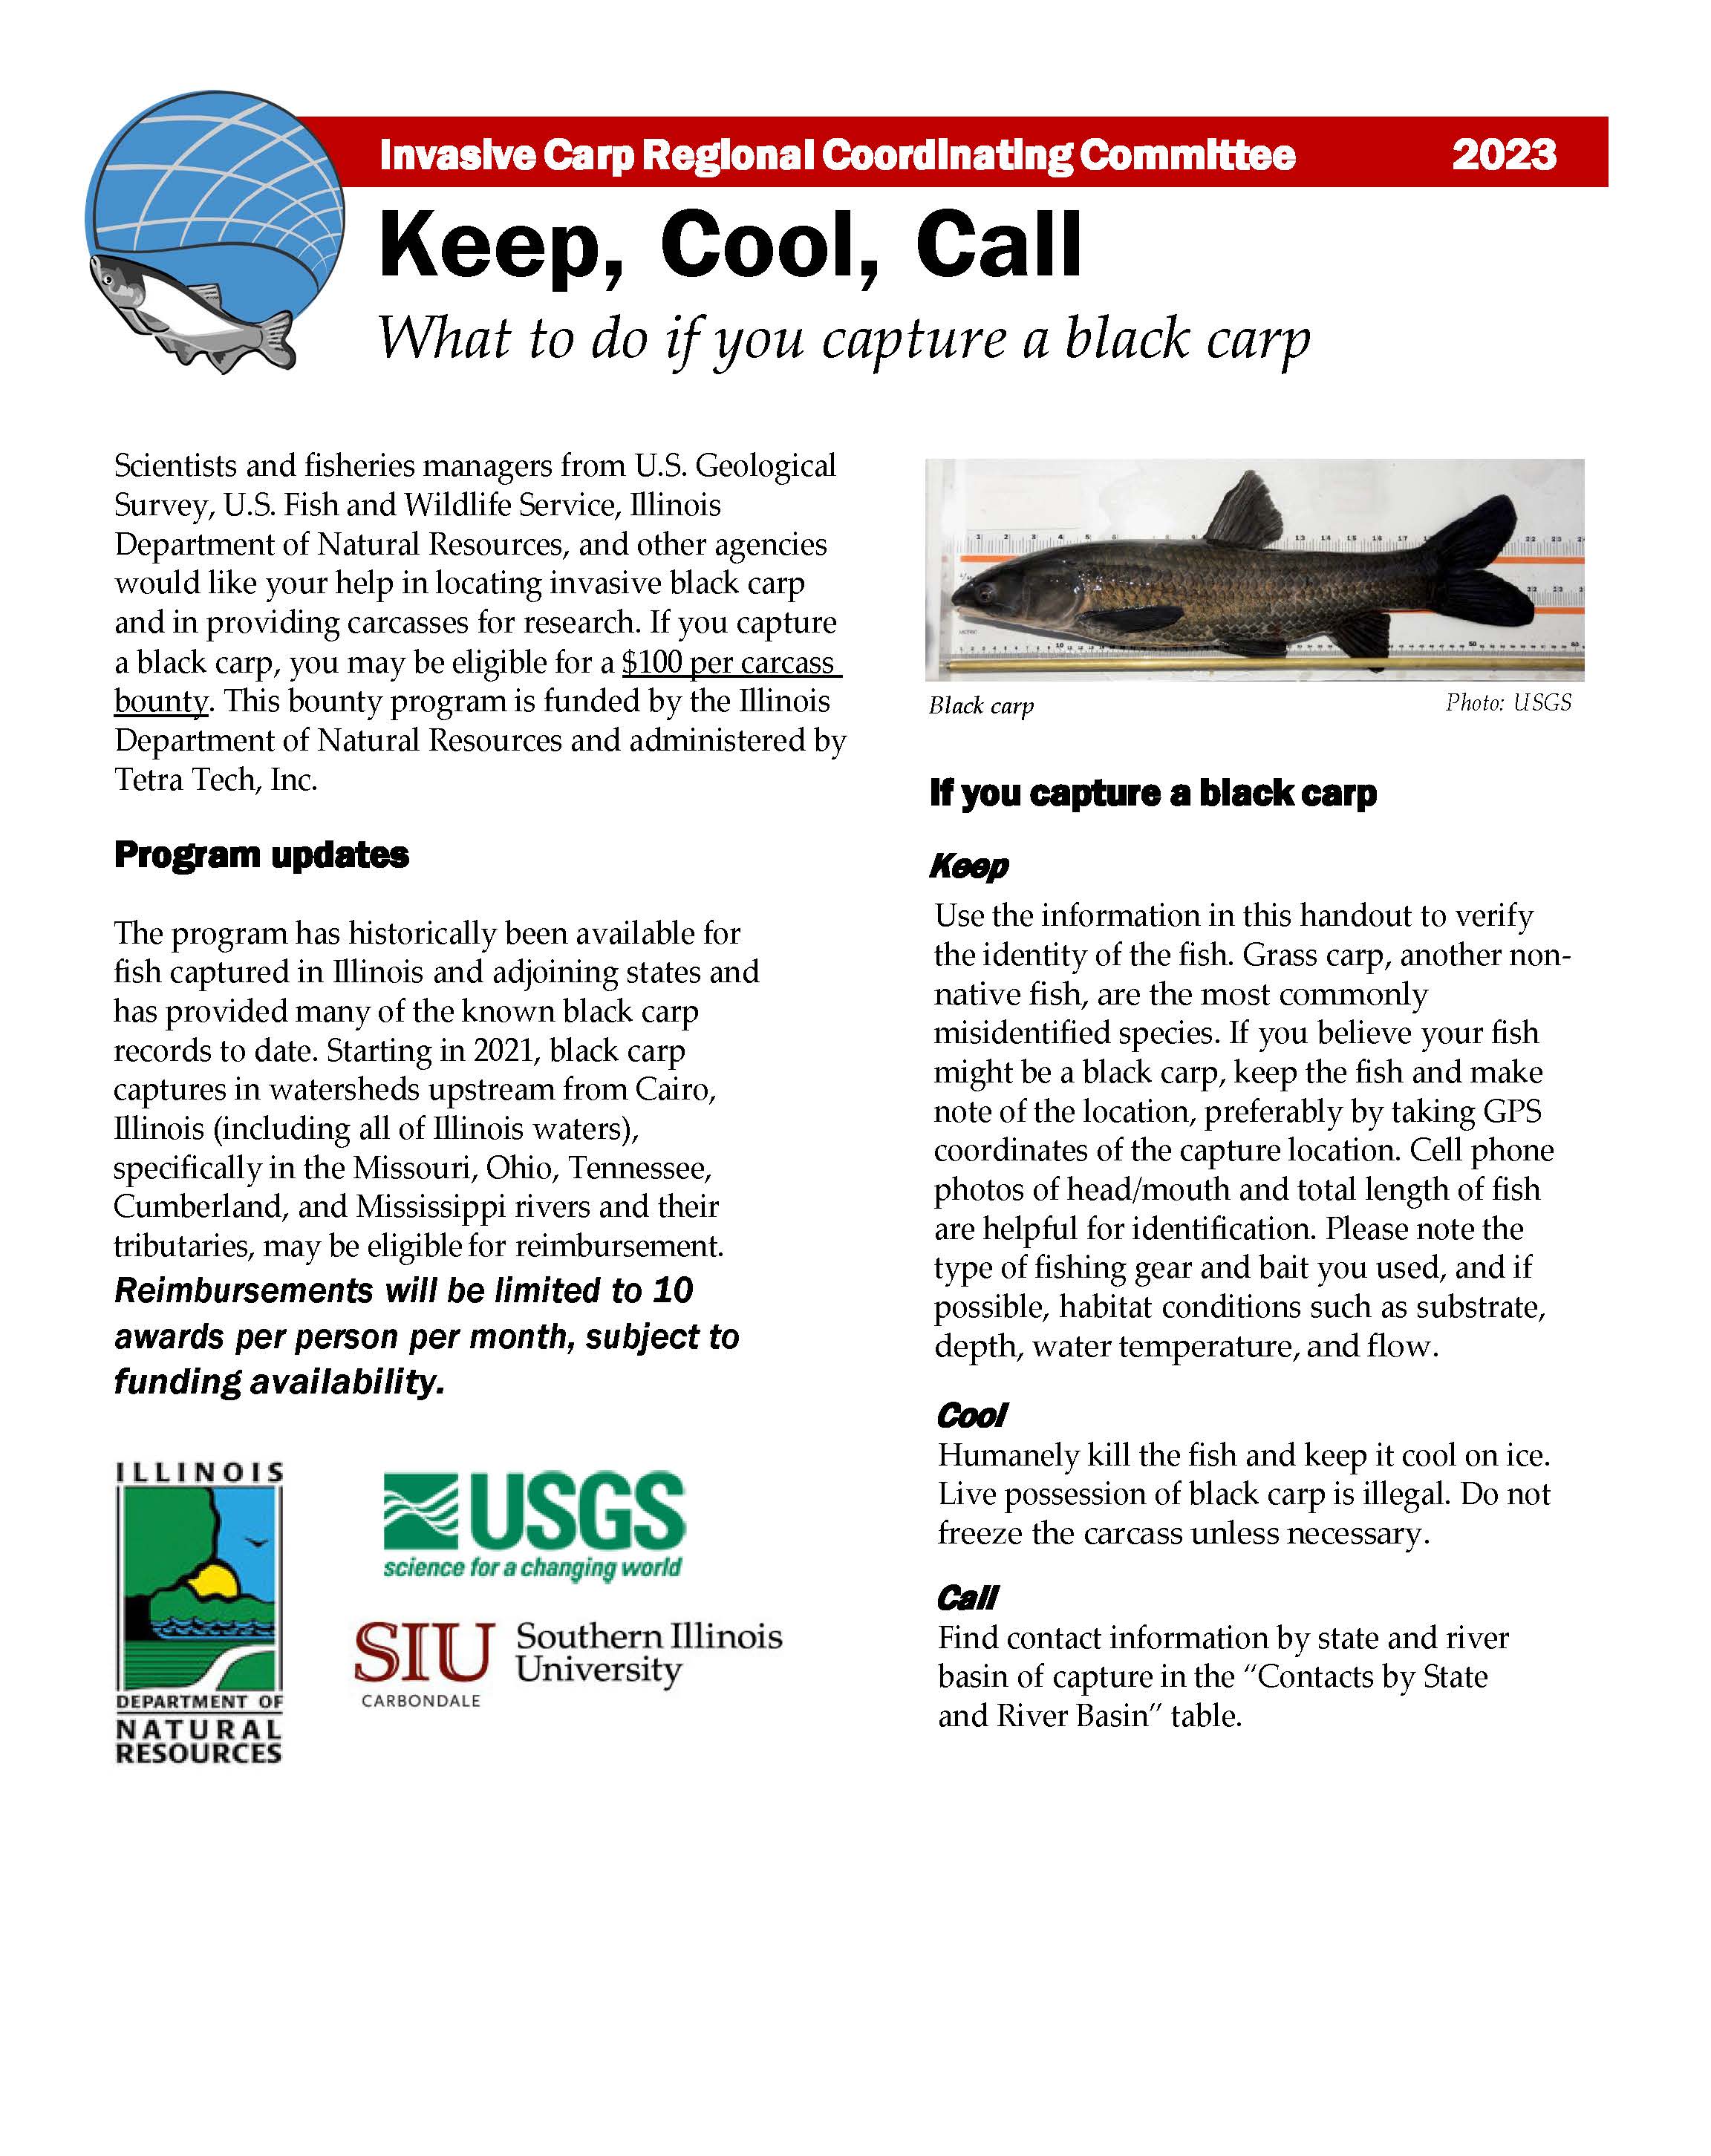 Keep, Cool, Call: What to Do If You Capture a Black Carp handout